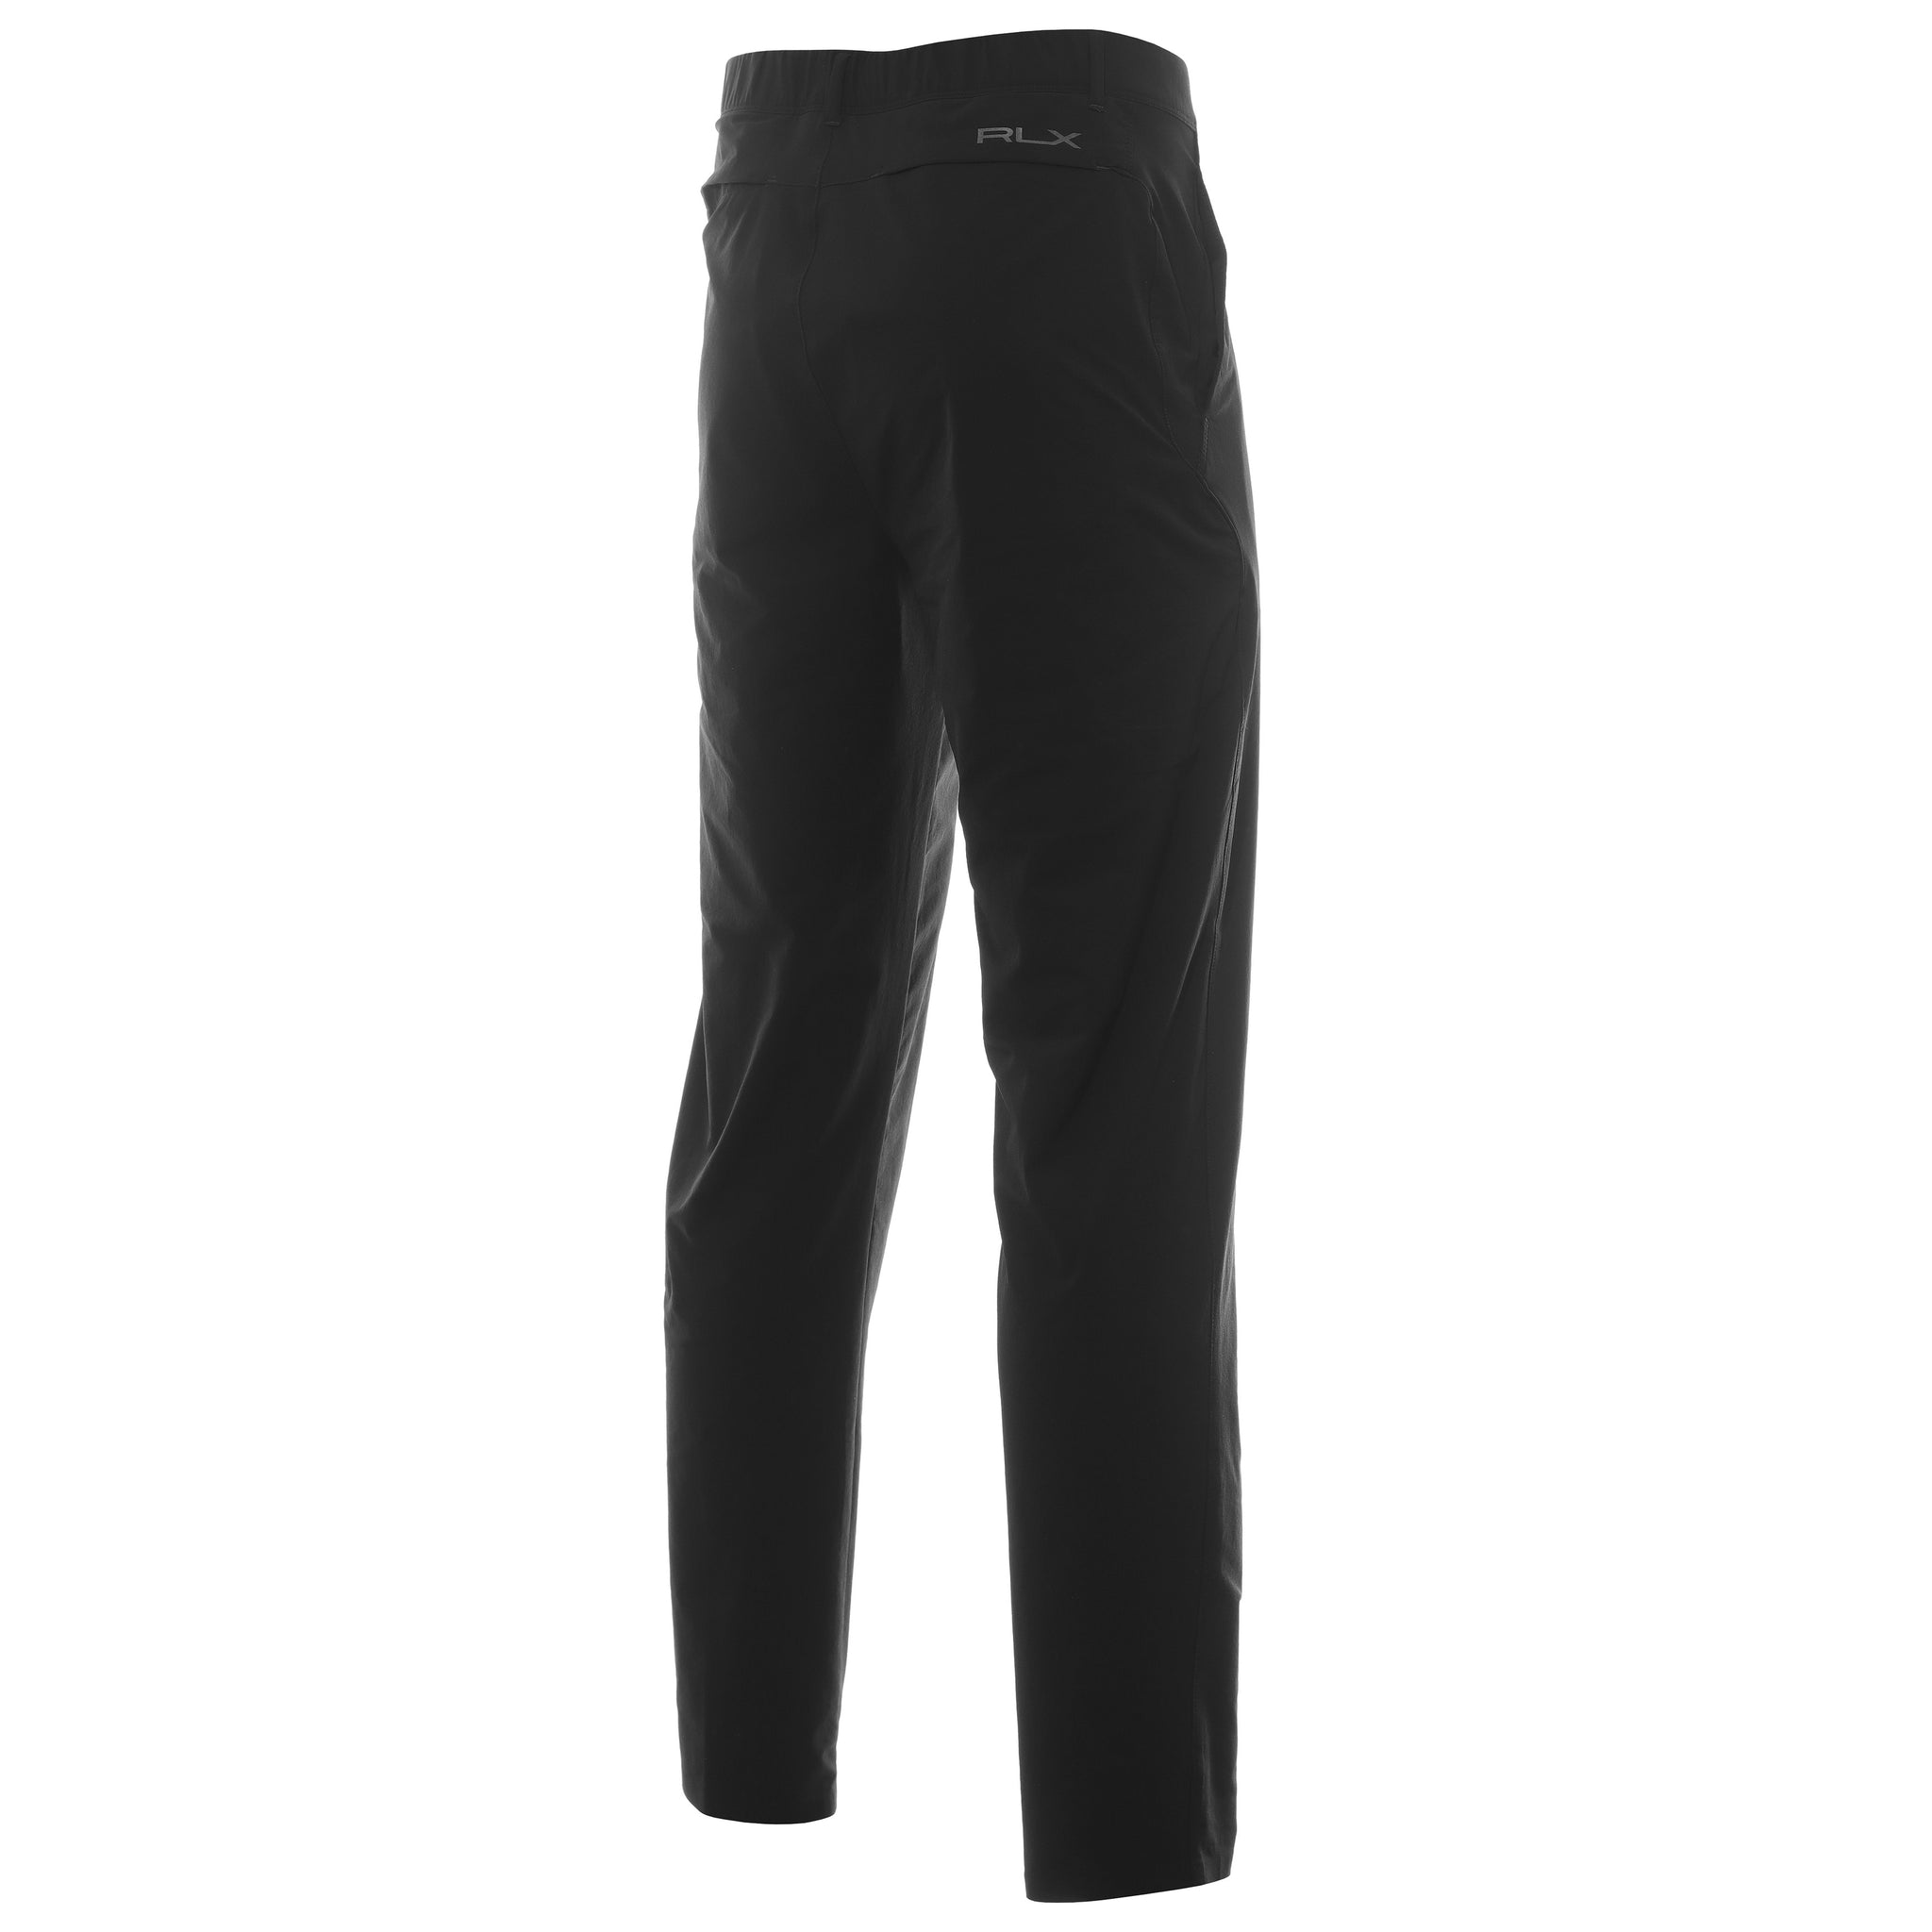 rlx-ralph-lauren-on-course-trousers-785915686-polo-black-001